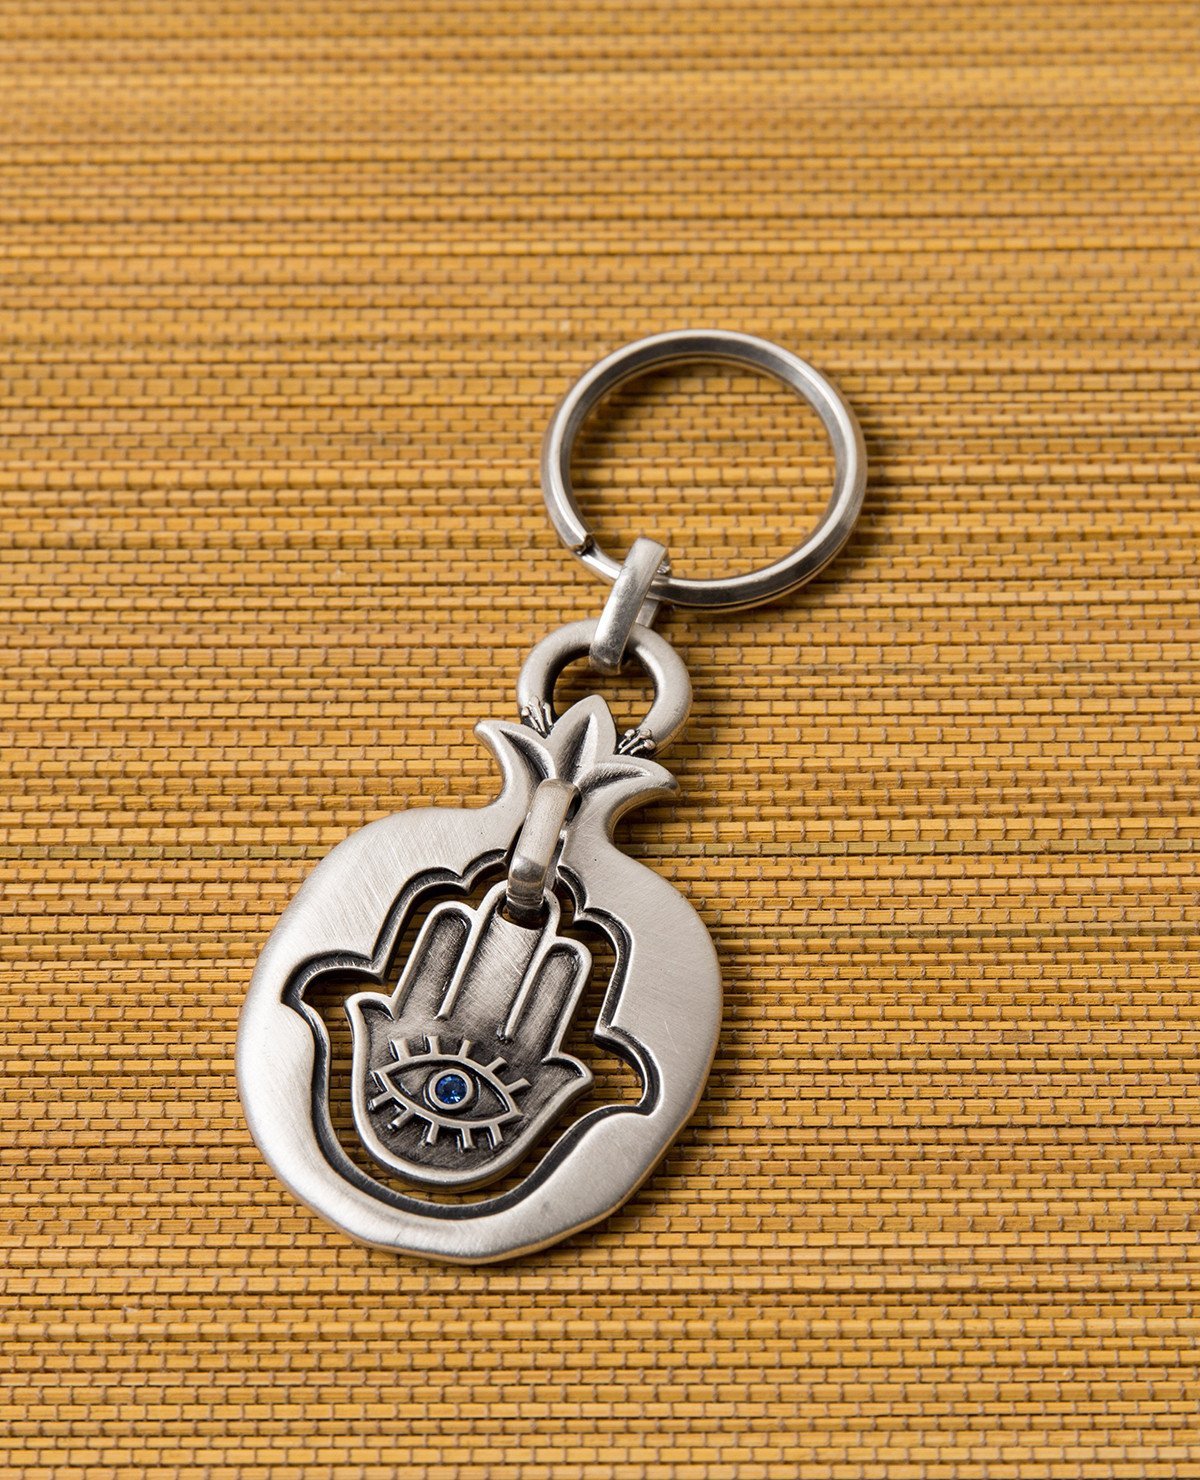 A blessing every time you open and lock. A charming keychain coated in sterling silver and carrying a blessing that follows you wherever you go. A Hamsa hangs within the hollow pomegranate frame. On it's one side an eye embedded with a blue colored crystal and a charm against the "evil eye", and on the other side appear the words "Hamsa On You" decorated with flowers, for luck and blessing. All of these are contained within the pomegranate, which brings the blessings of abundance and fertility. A suitable a